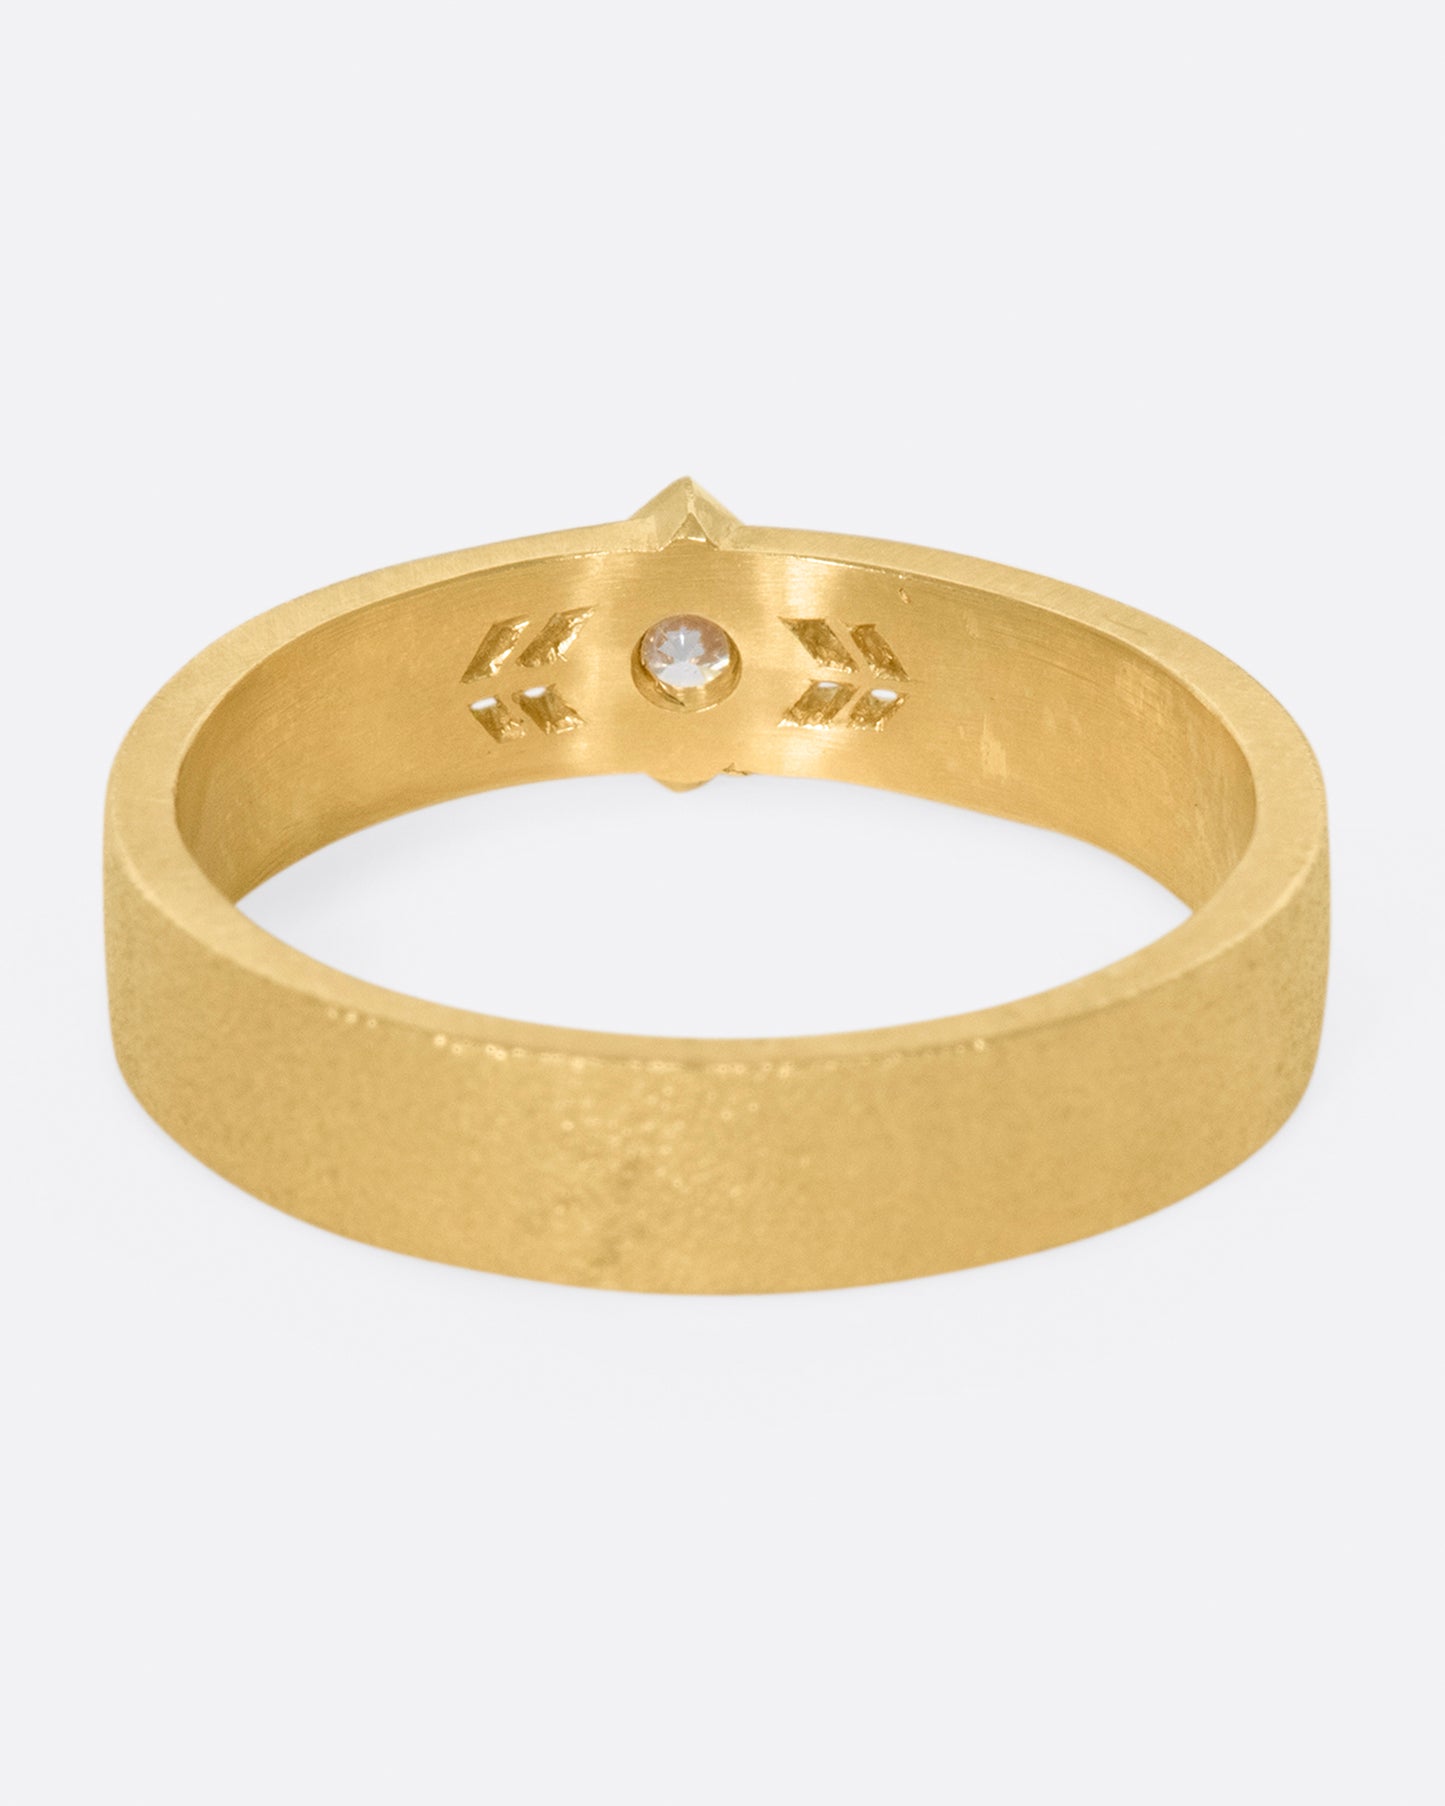 This 14k gold band has a stipple textured finish and an extremely sparkly, high-quality diamond popping in the center